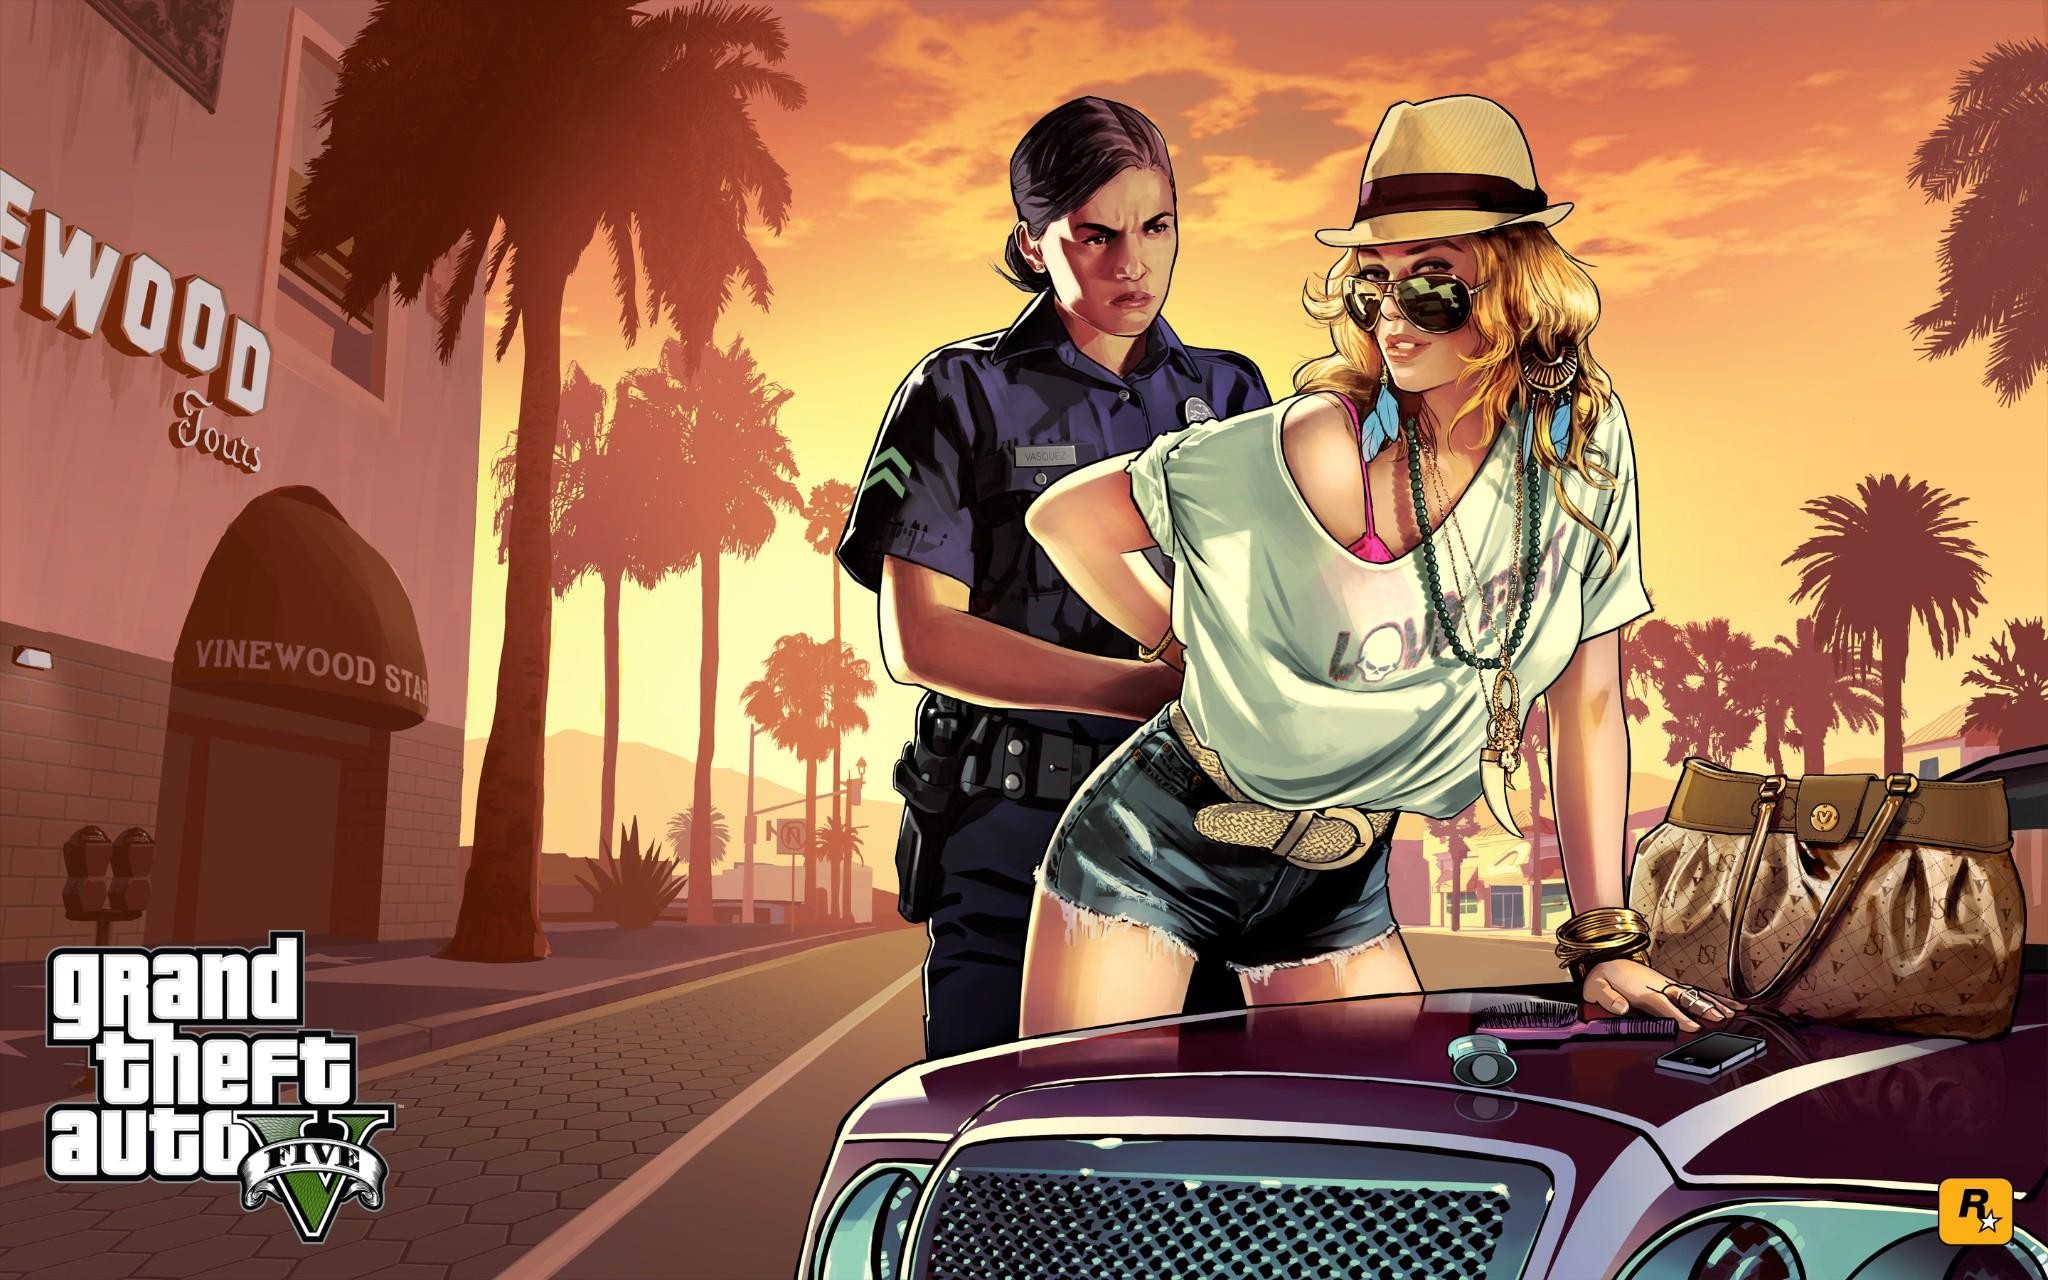 General 2048x1280 Grand Theft Auto V Grand Theft Auto video games Rockstar Games PC gaming video game art video game girls women with shades police women